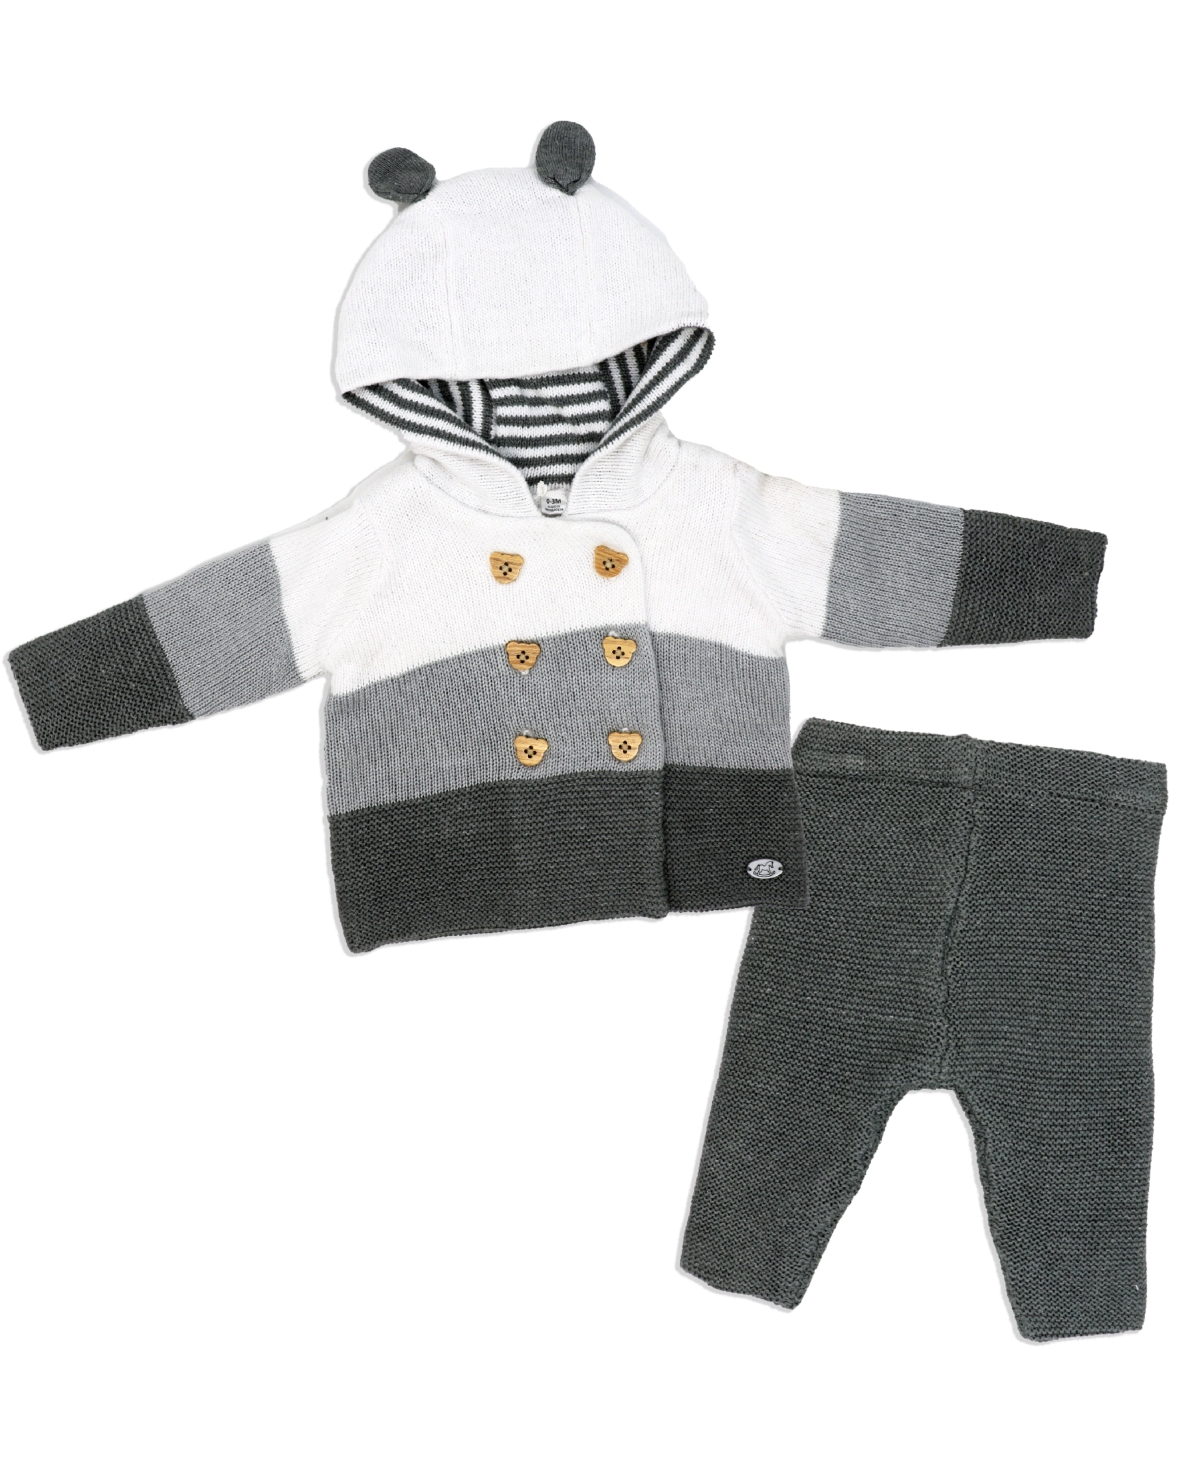 Rock-a-bye Baby Boutique Baby Boys Knit Hooded Cardigan And Pants, 2 Piece Set In Gray